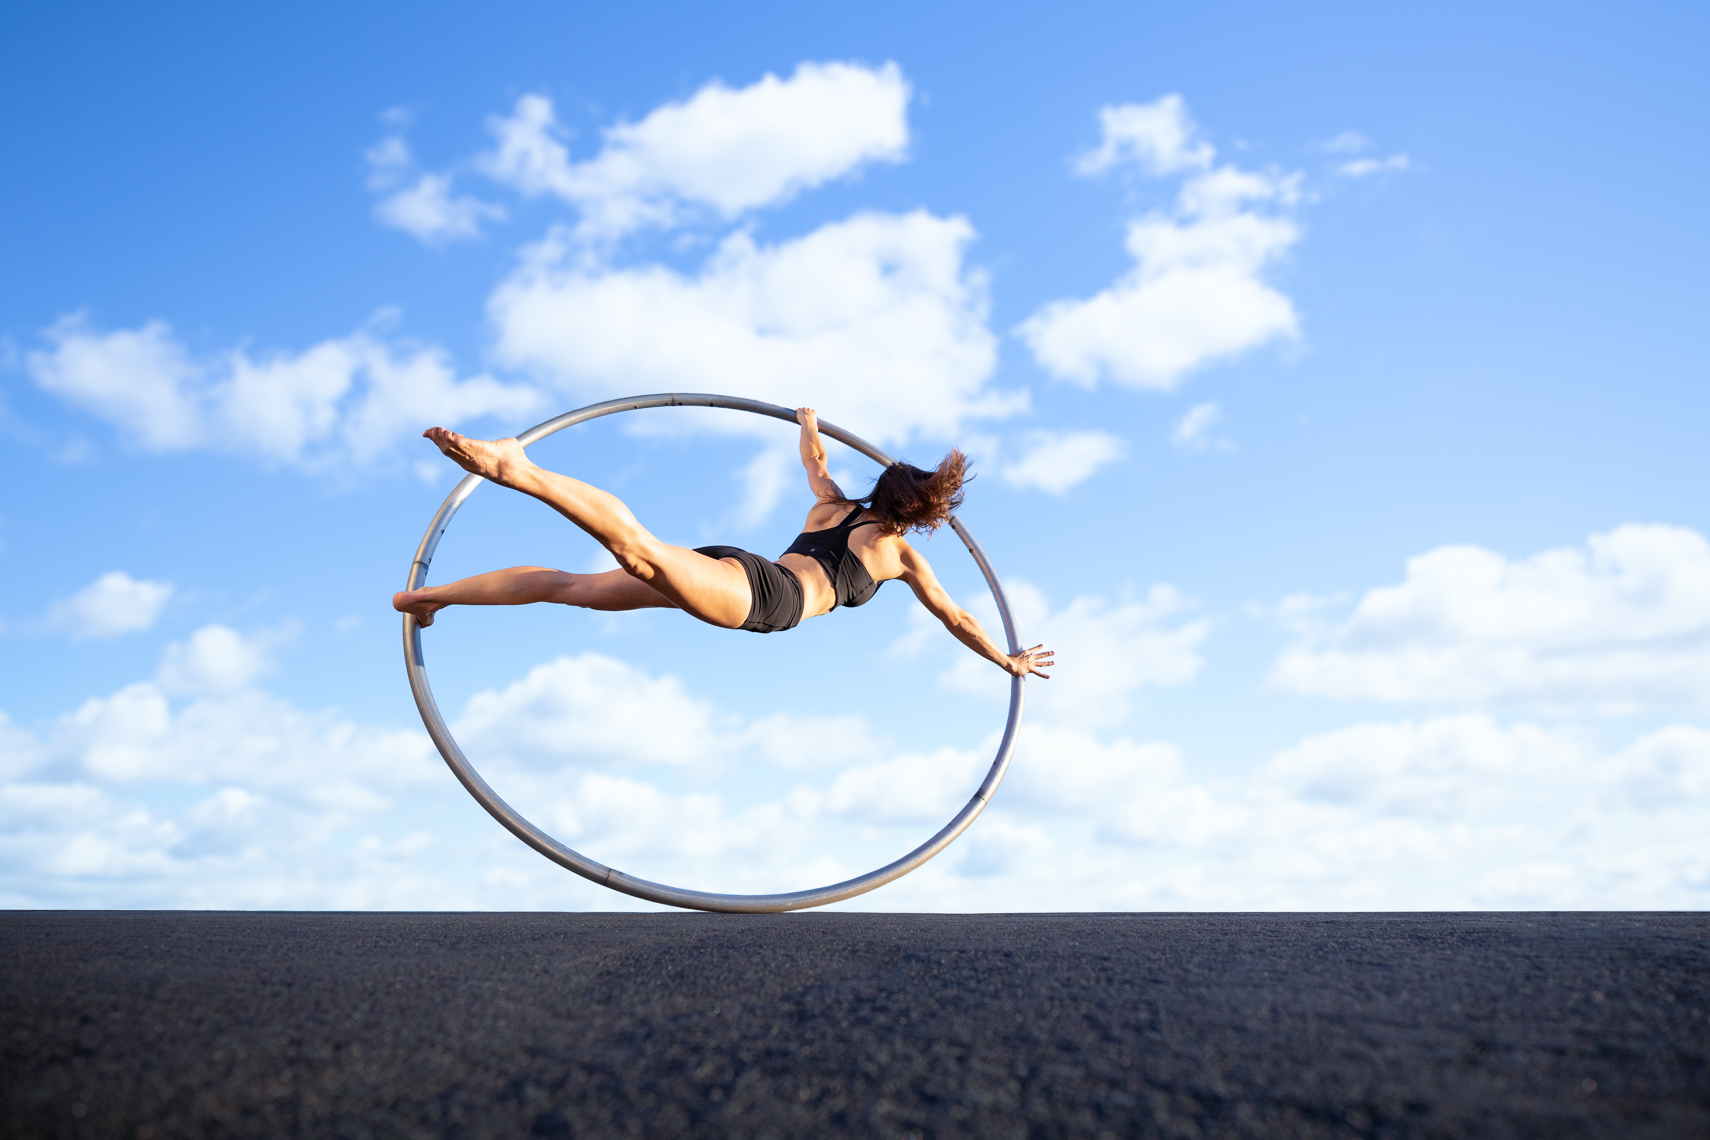 Circus performer on a Cyr wheel caputed by fitness advertising photographer Robert Houser